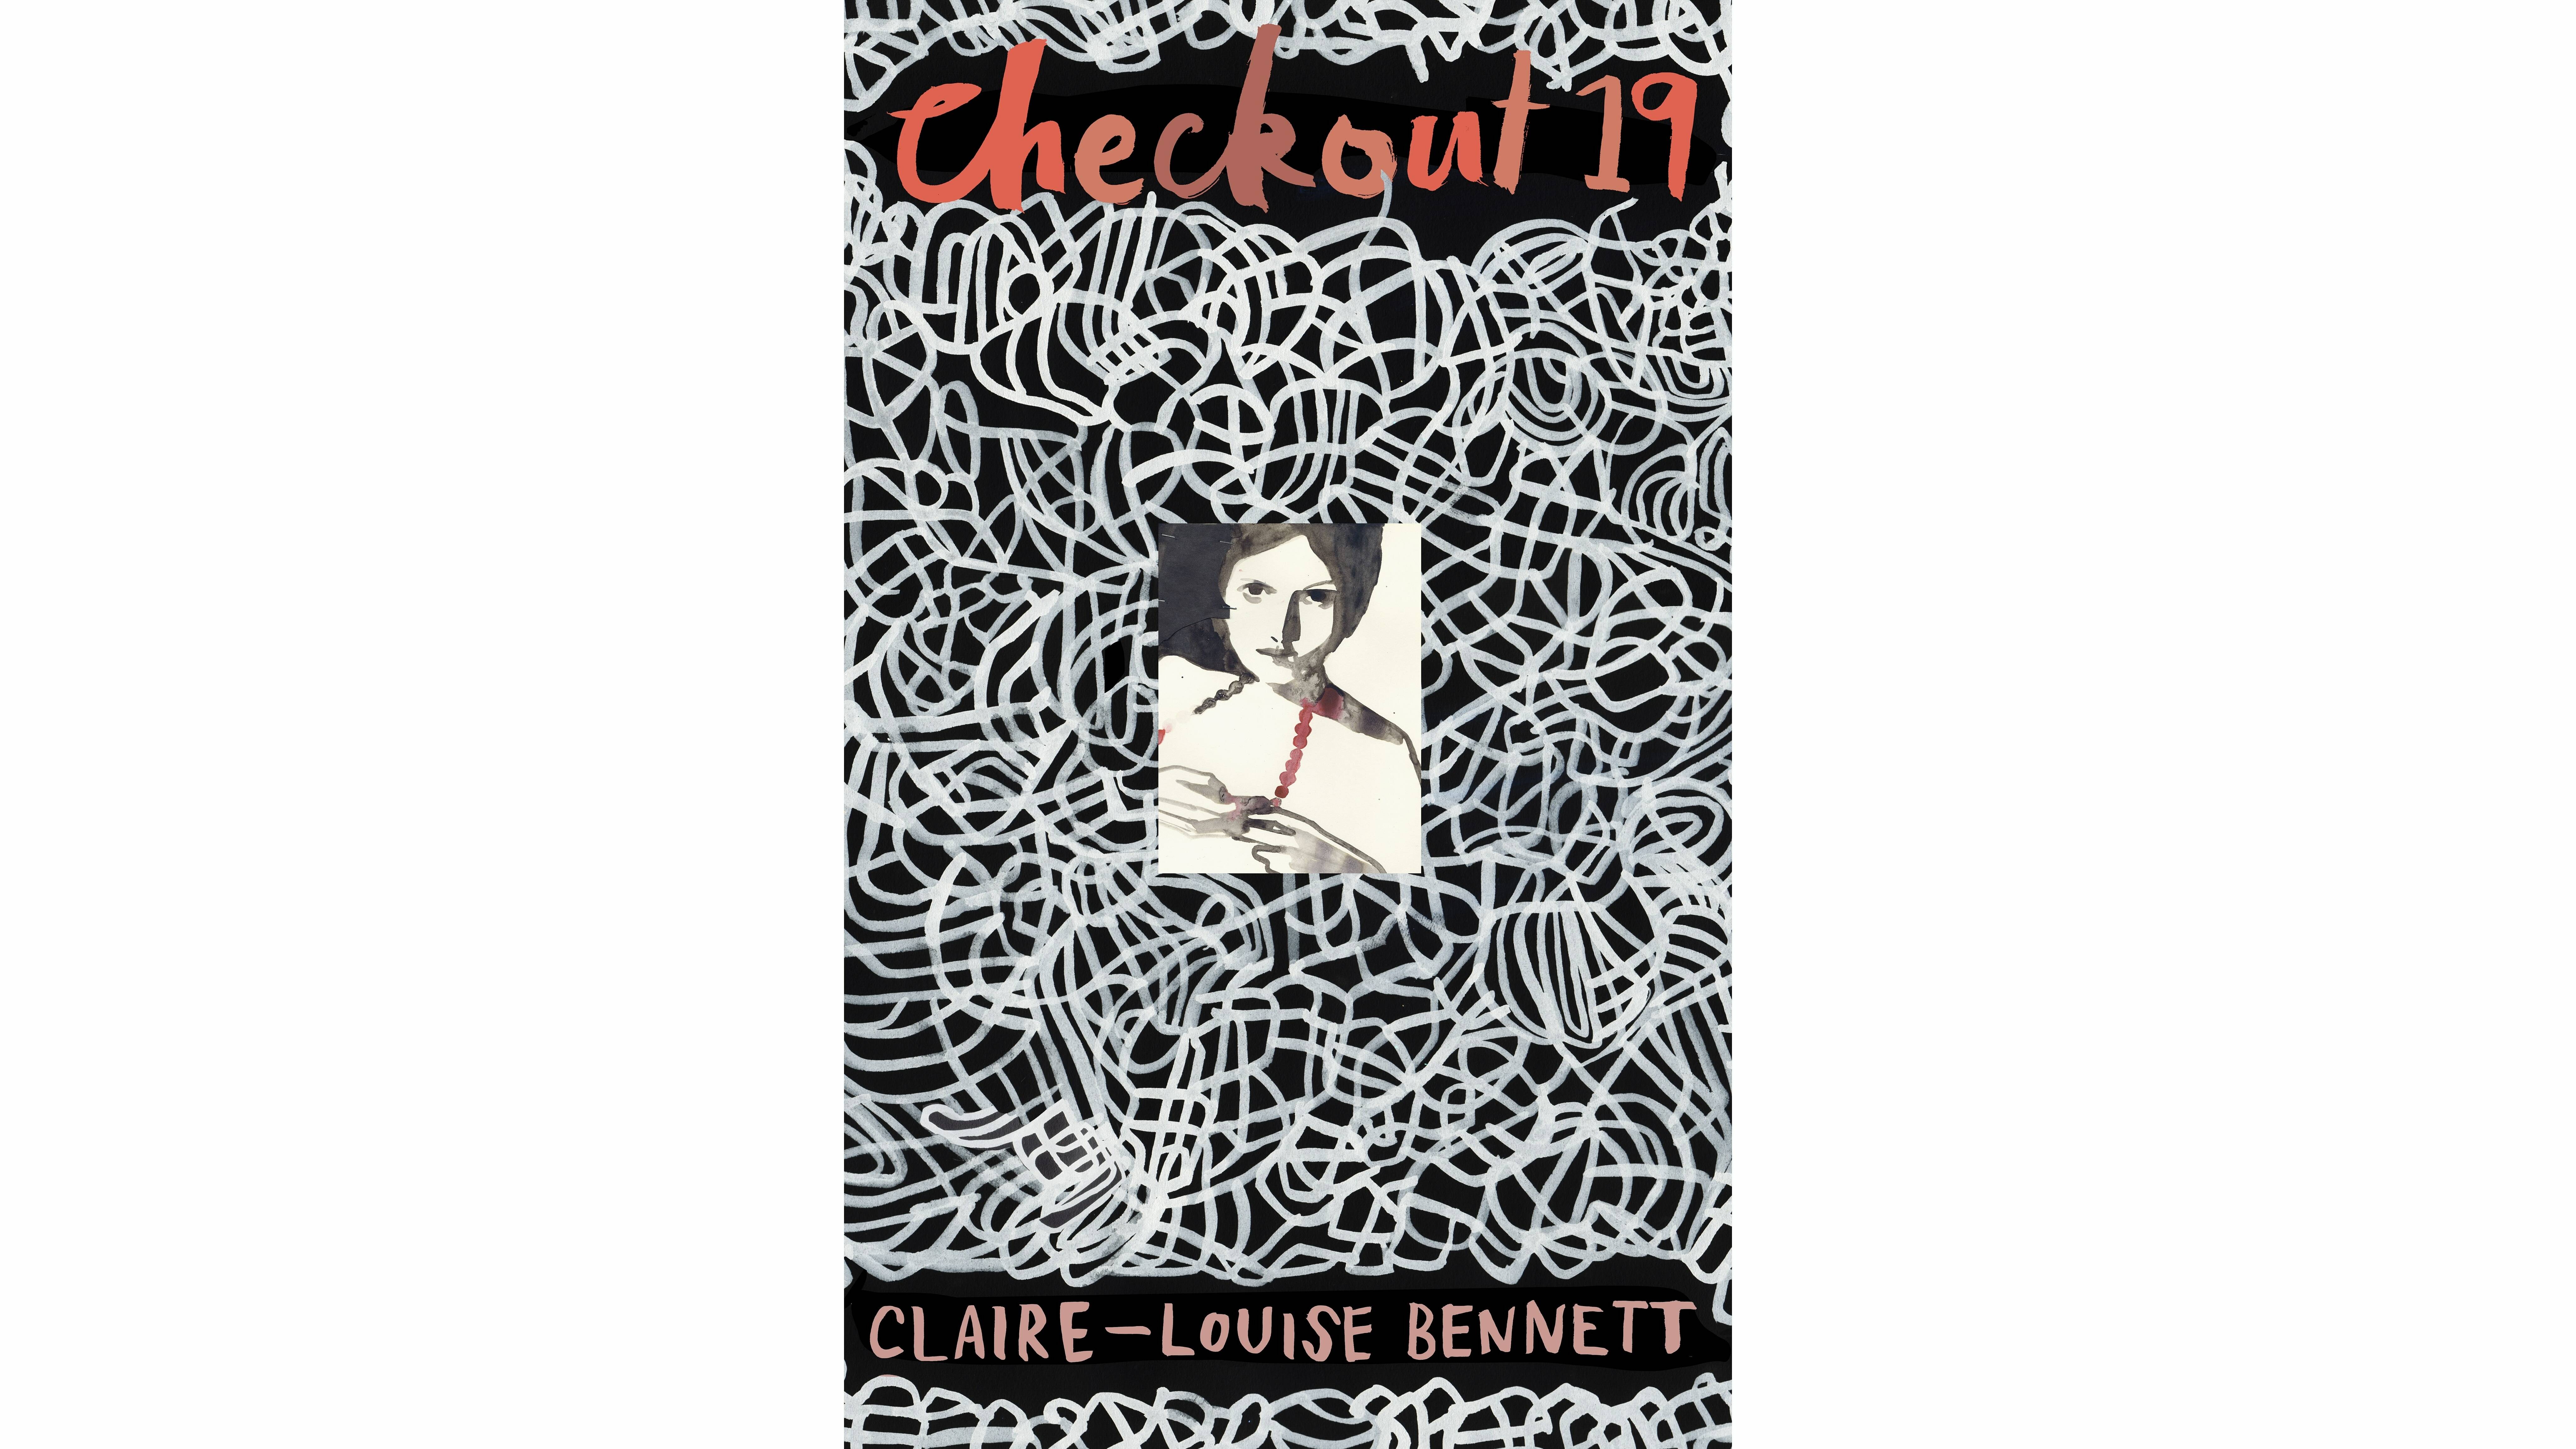 Book review: Checkout 19, by Claire-Louise Bennett